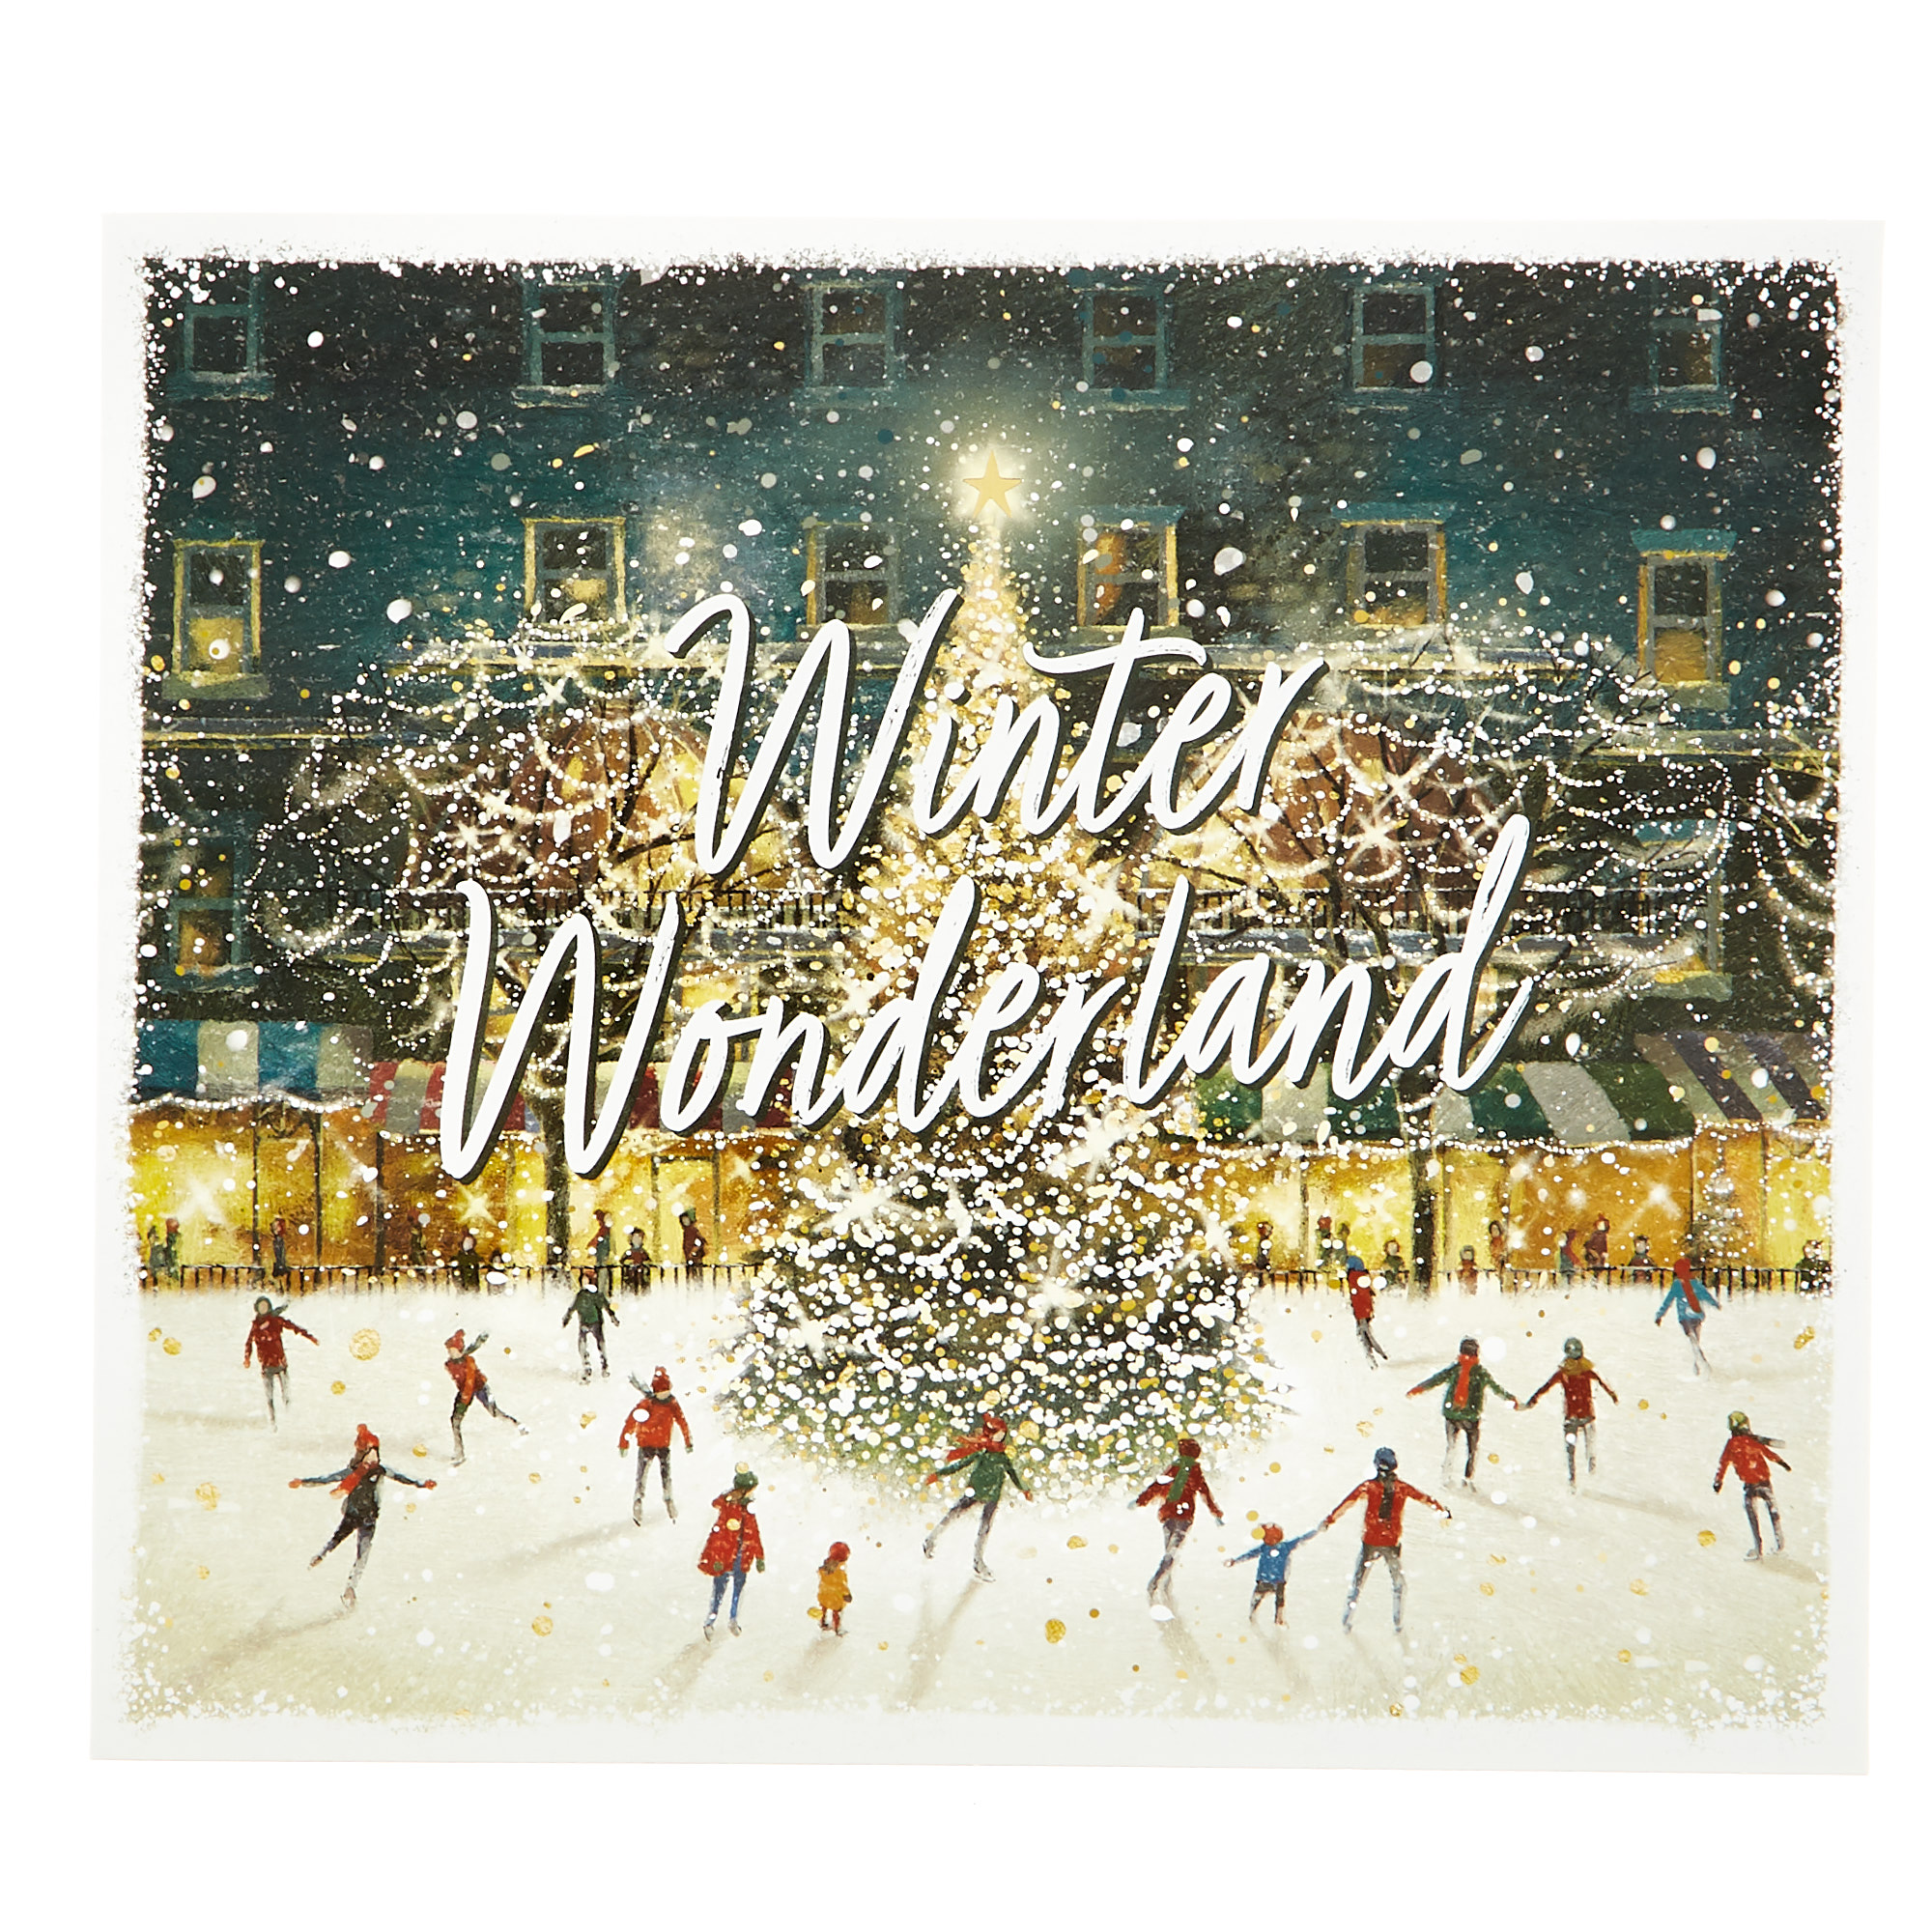 12 Deluxe Charity Boxed Christmas Cards - Winter Wonderland (2 Designs)